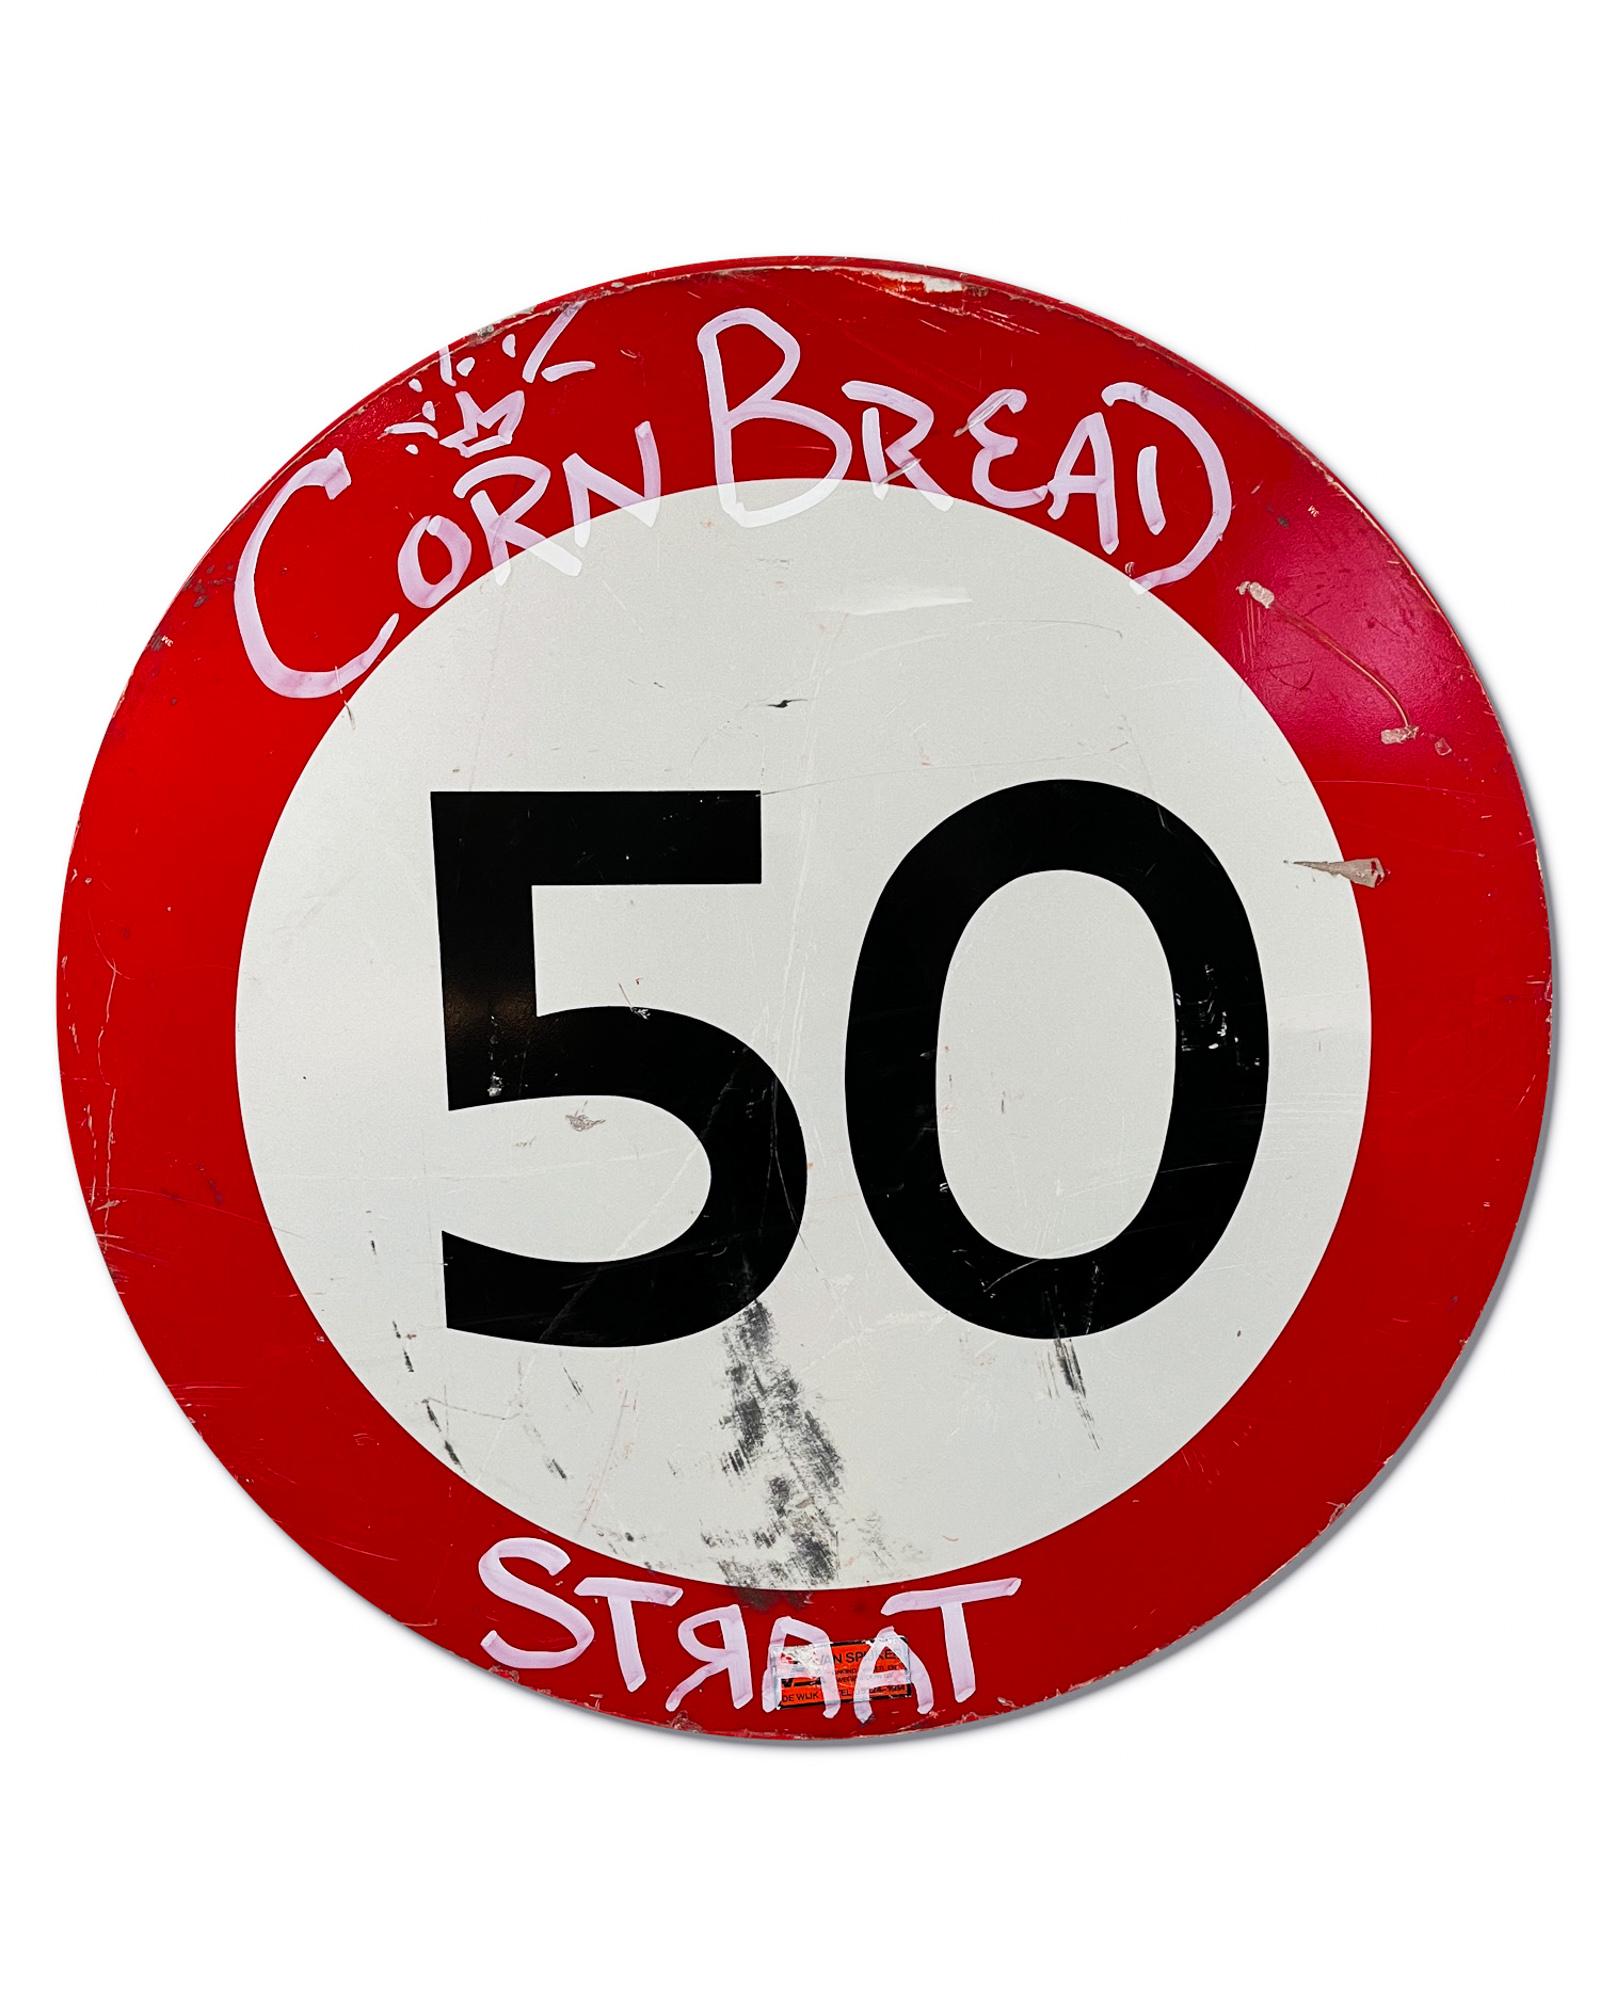 This artwork titled "Cornbread STRAAT Shield" is an original artwork by Cornbread made of acrylic paint on a retired Amsterdam street sign. The piece measures 80cm / 31.5in diameter. 

Darryl McCray, known by his tagging name, “Cornbread,” is a